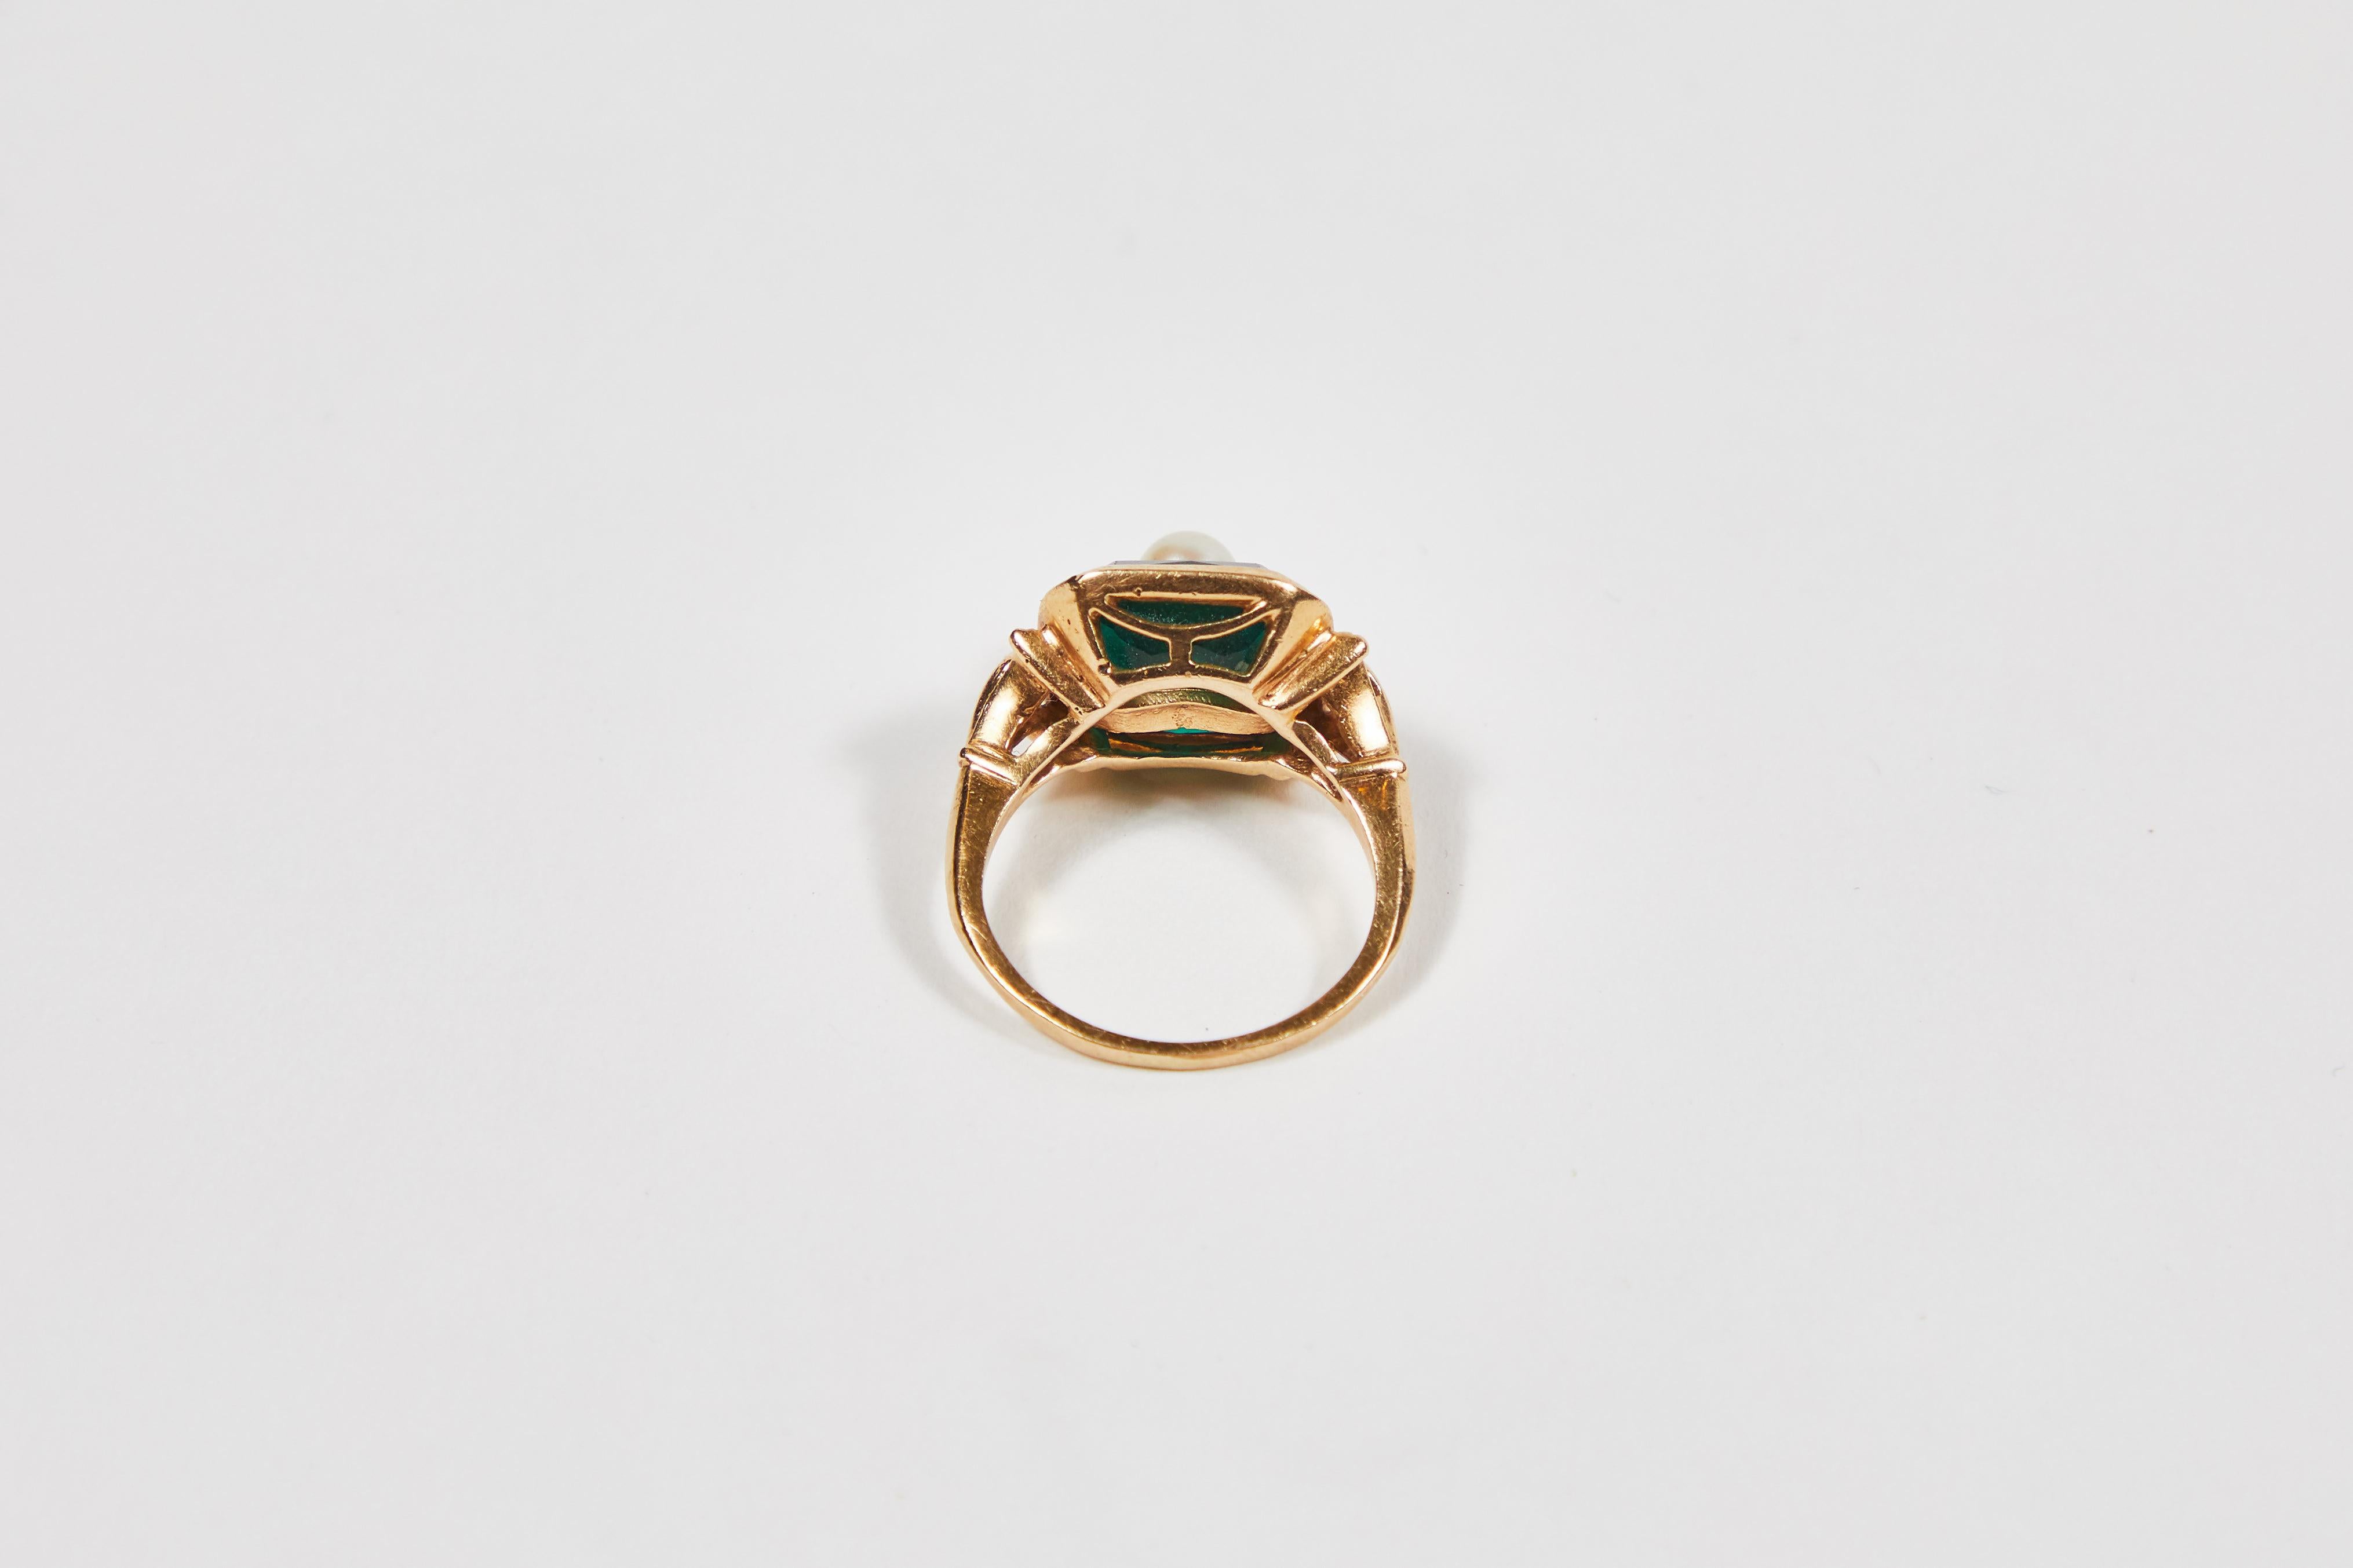 Antique Ostby & Barton 14K Gold Cocktail Ring with Dark Green Emerald Cut Glass Stone with Center Cultured Pearl Accent.

Otsy & Barton were a famed jewelry company formed in the mid 19th Century and came to become to be known as the largest ring